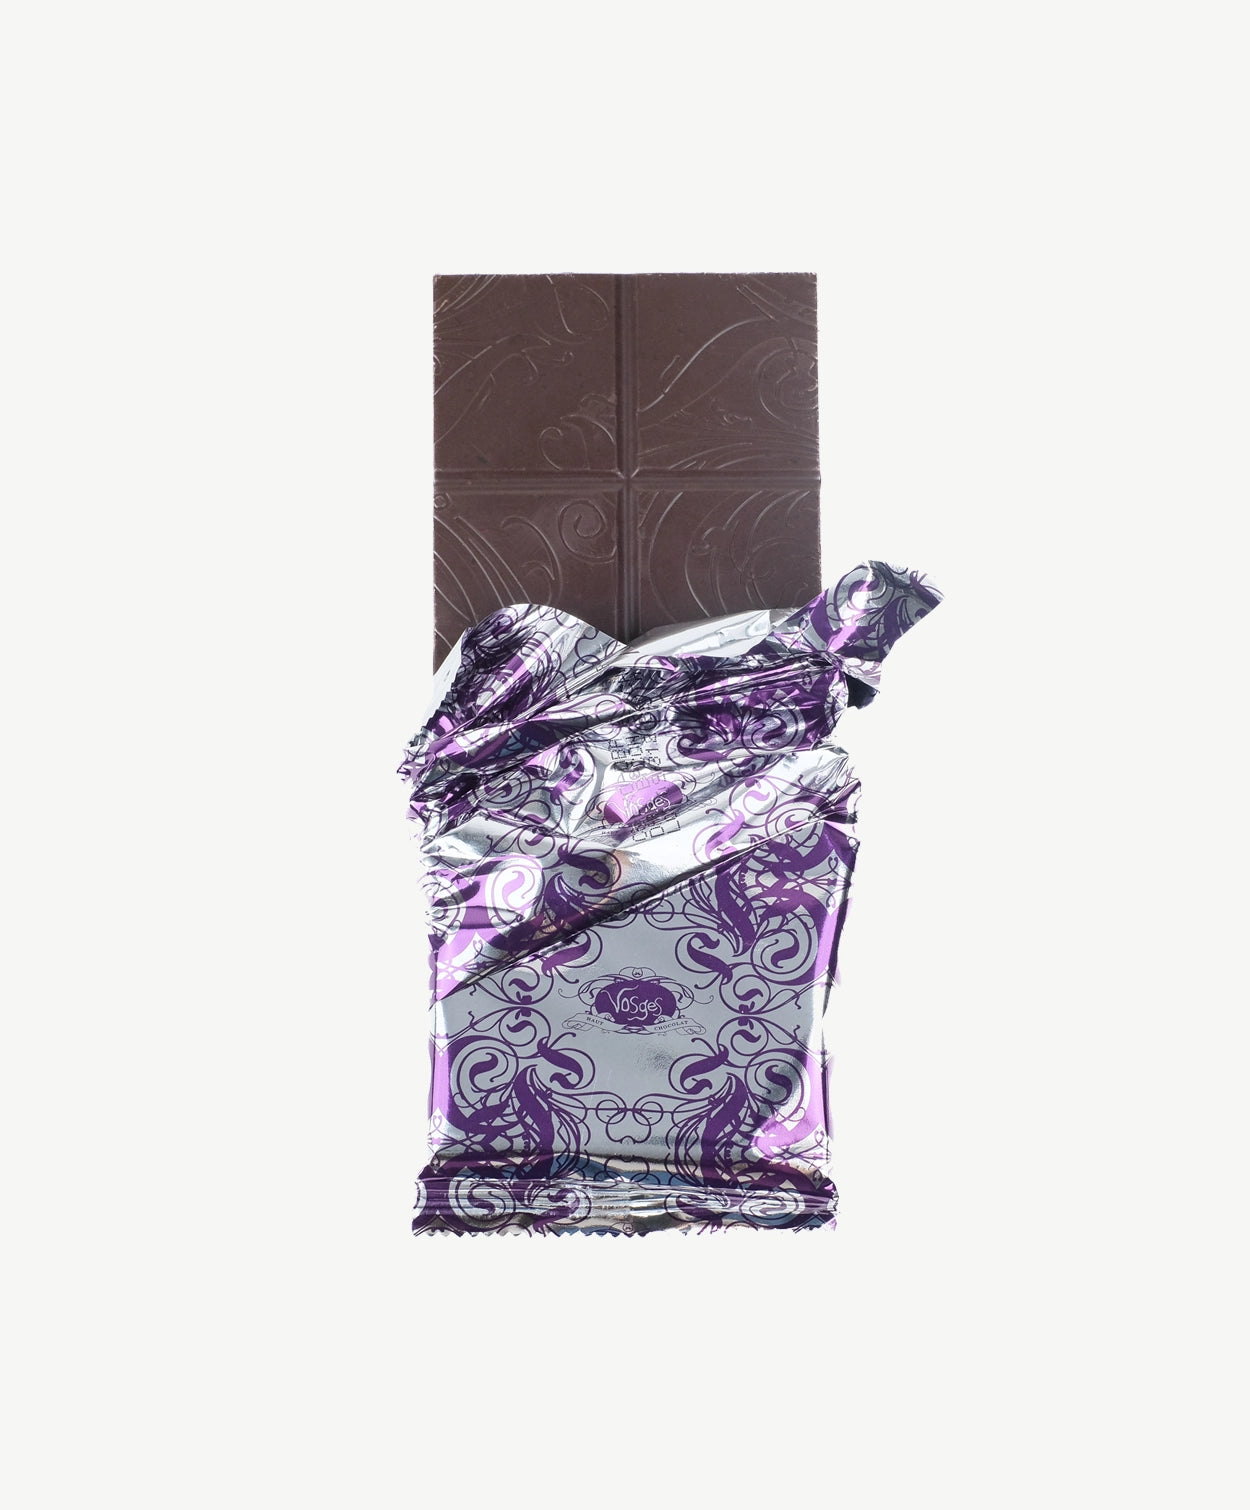 Unwrapped Vosges Mo's Dark Chocolate Bacon Bar in a silver wrapper stands upright on a white background.